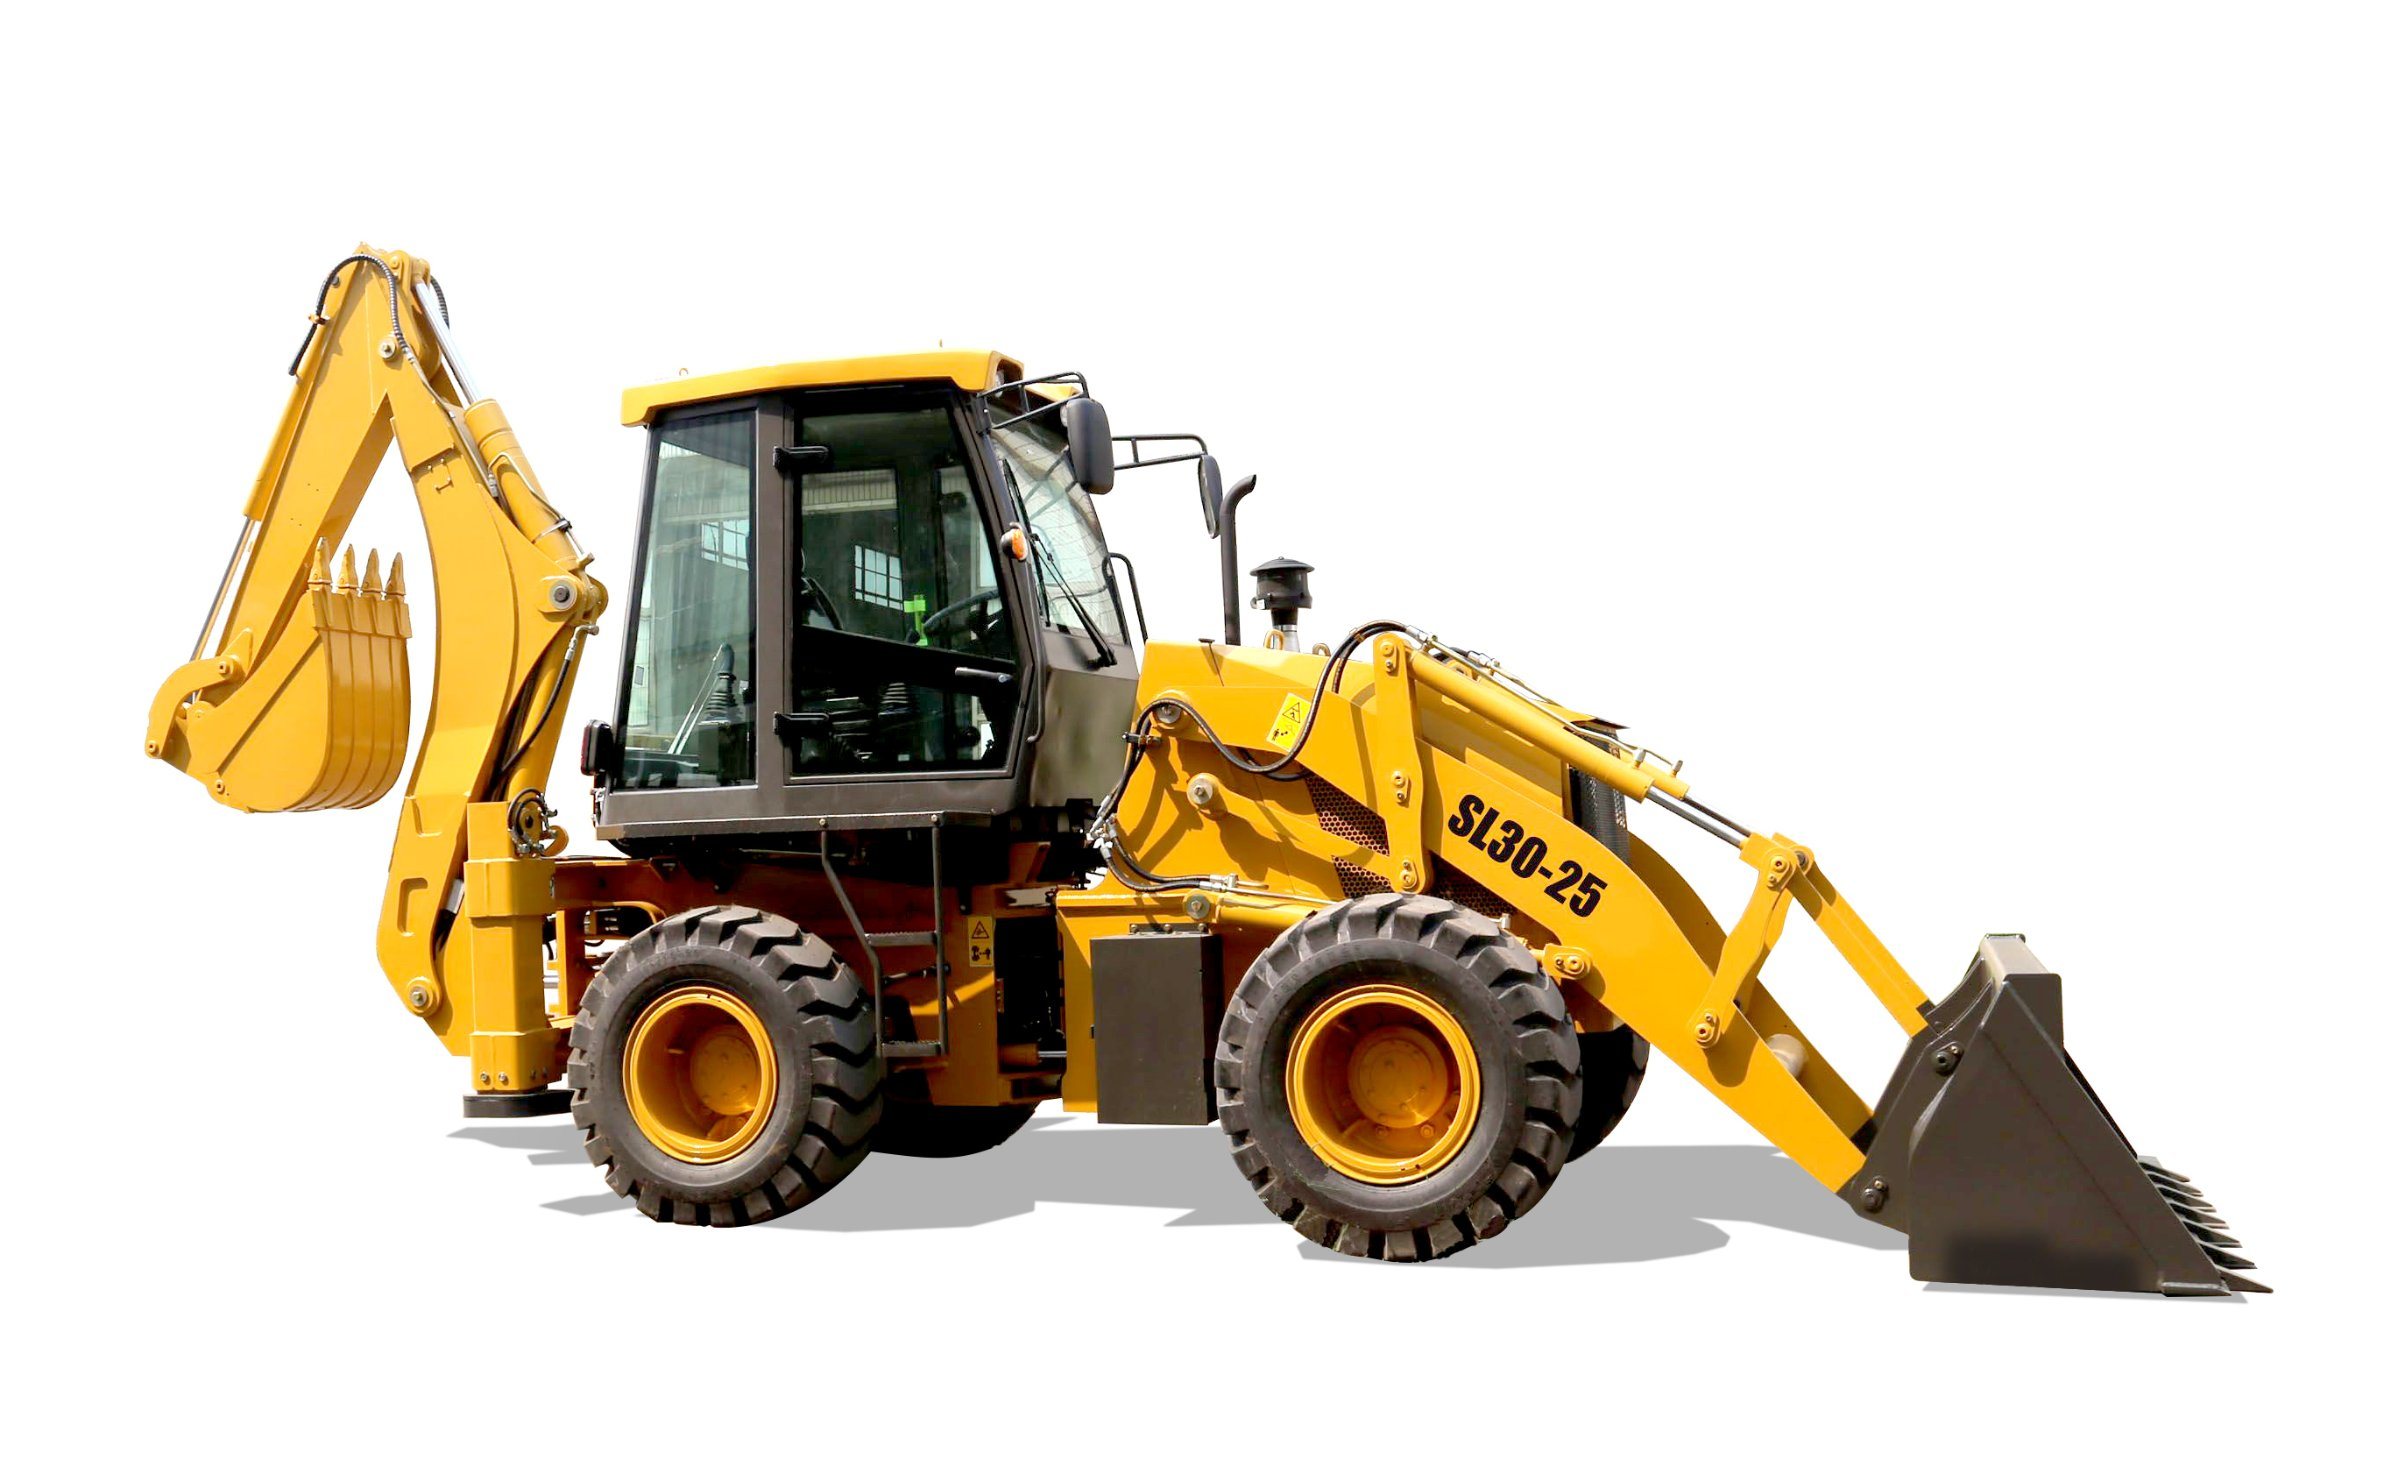 Shantui Towable Mini Backhoe Loader (SL30-25) with Cheap Price